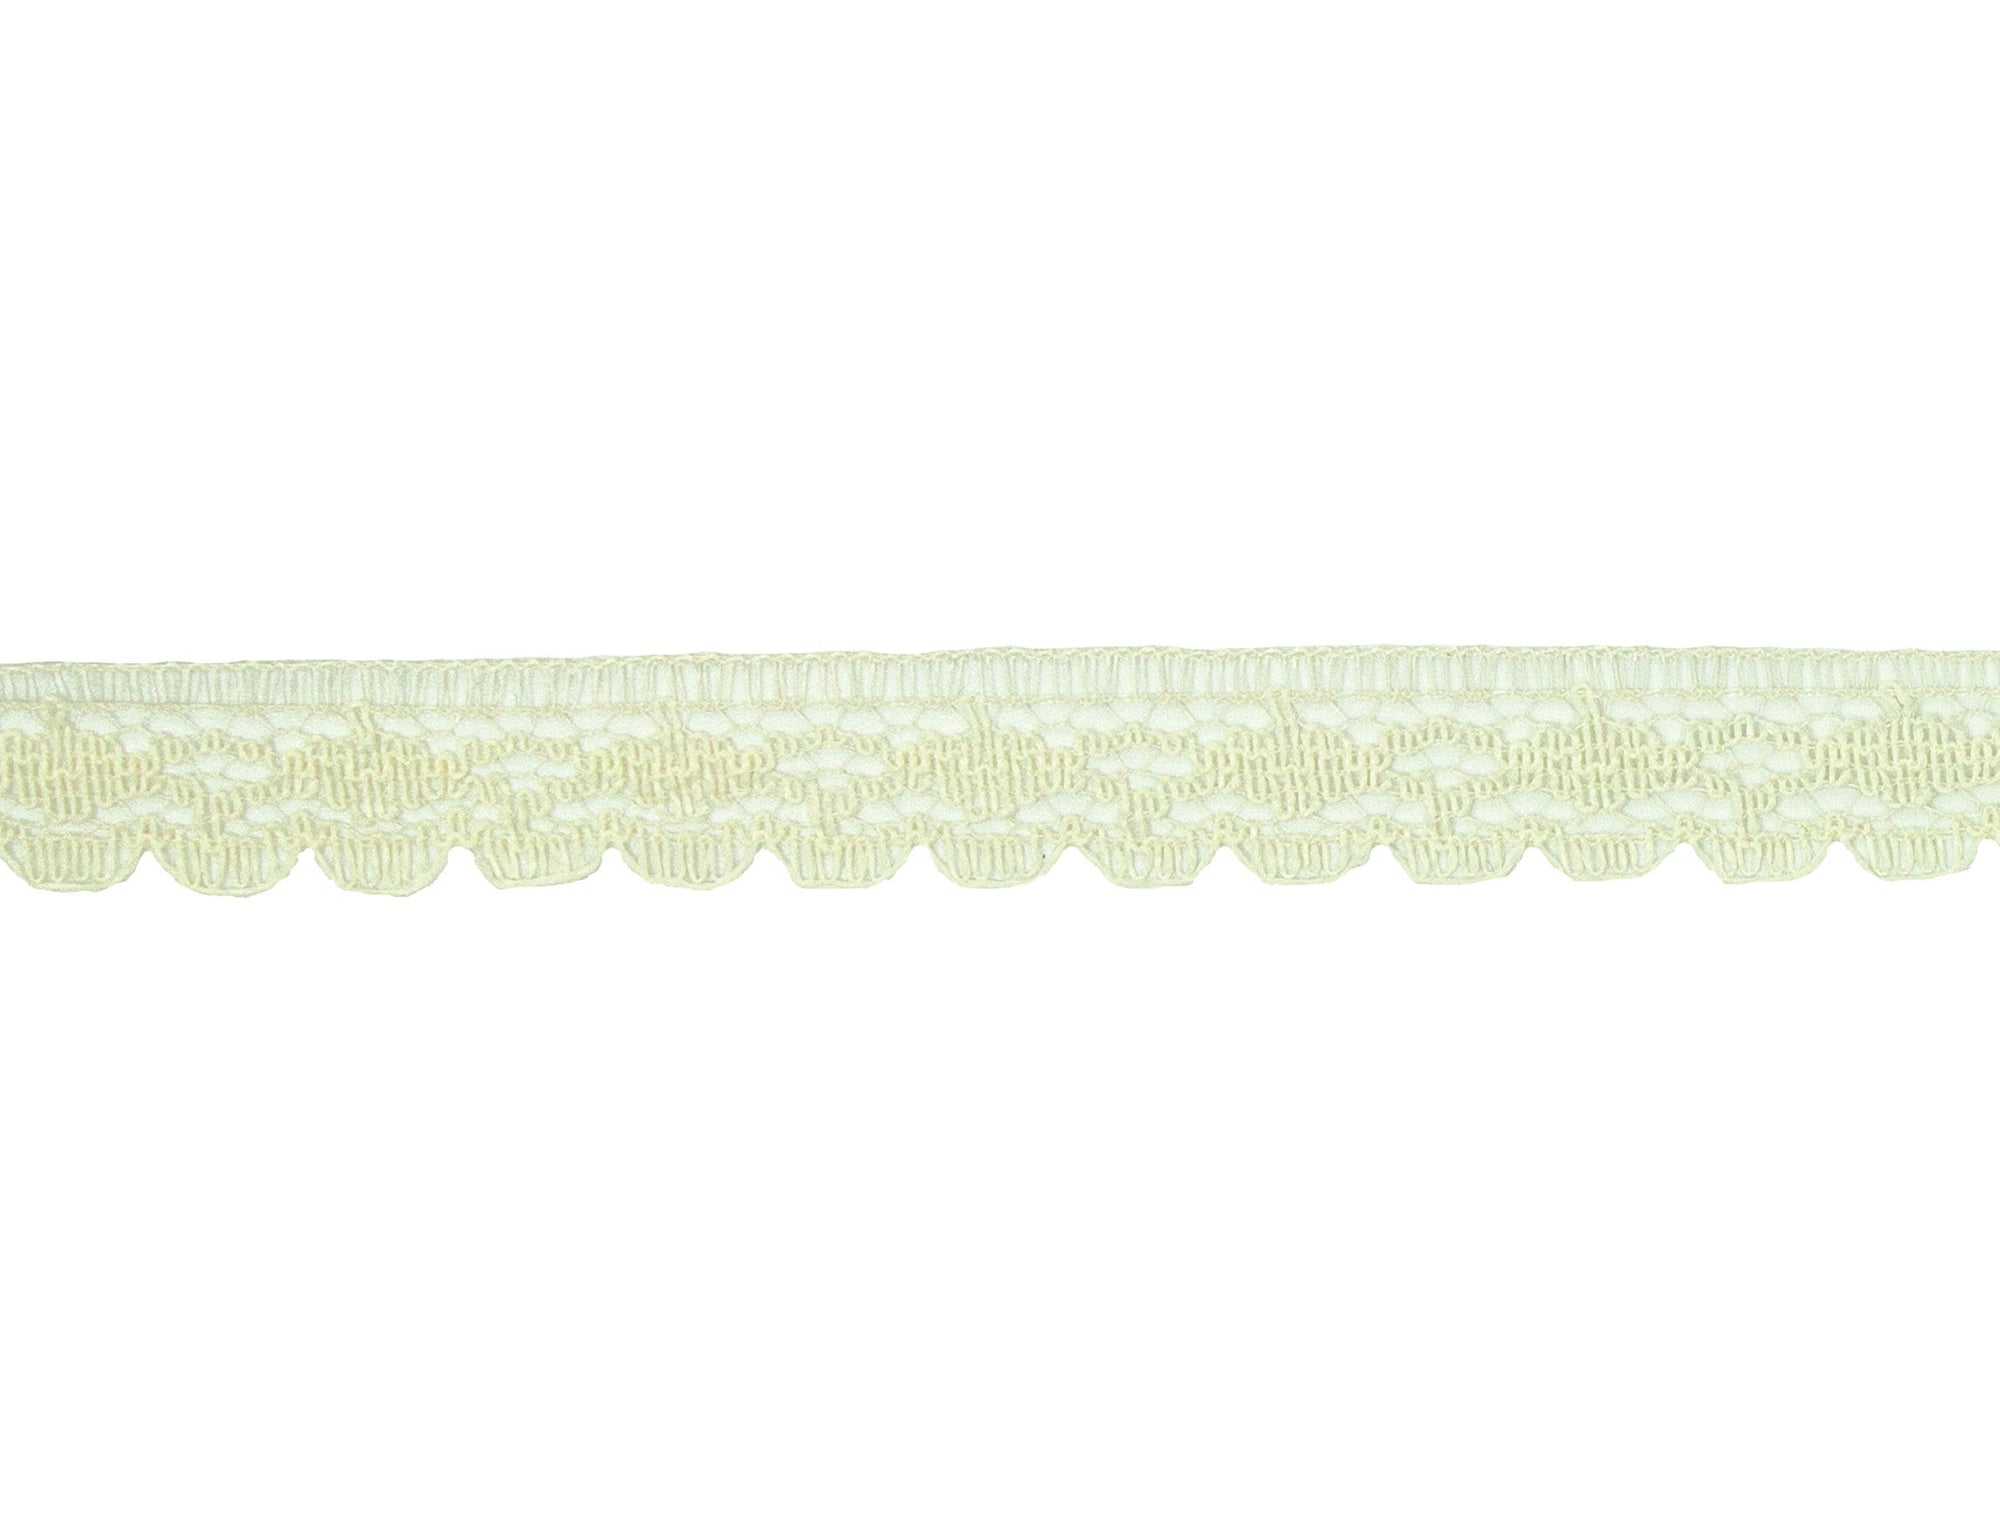 Vintage Lace Ivory Edge 1/2" Wide - One Piece 7 Yards Length